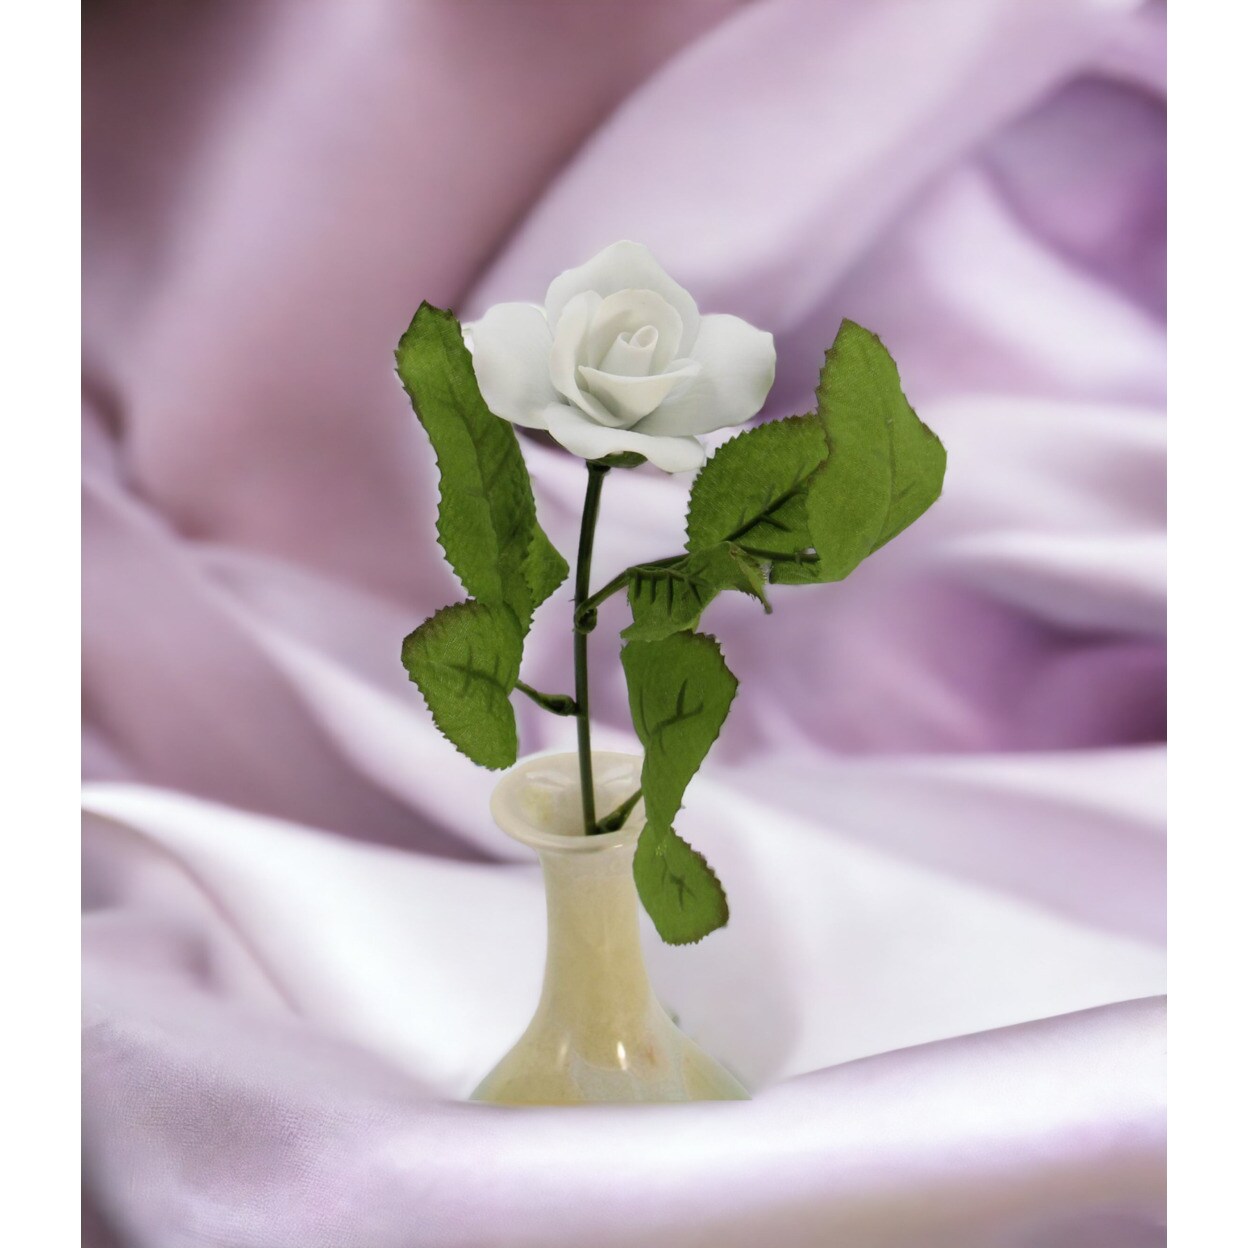 kevinsgiftshoppe Hand Crafted Ceramic White Rose Flower-Vase NOT Included  Wedding Decor or Gift Anniversary Decor